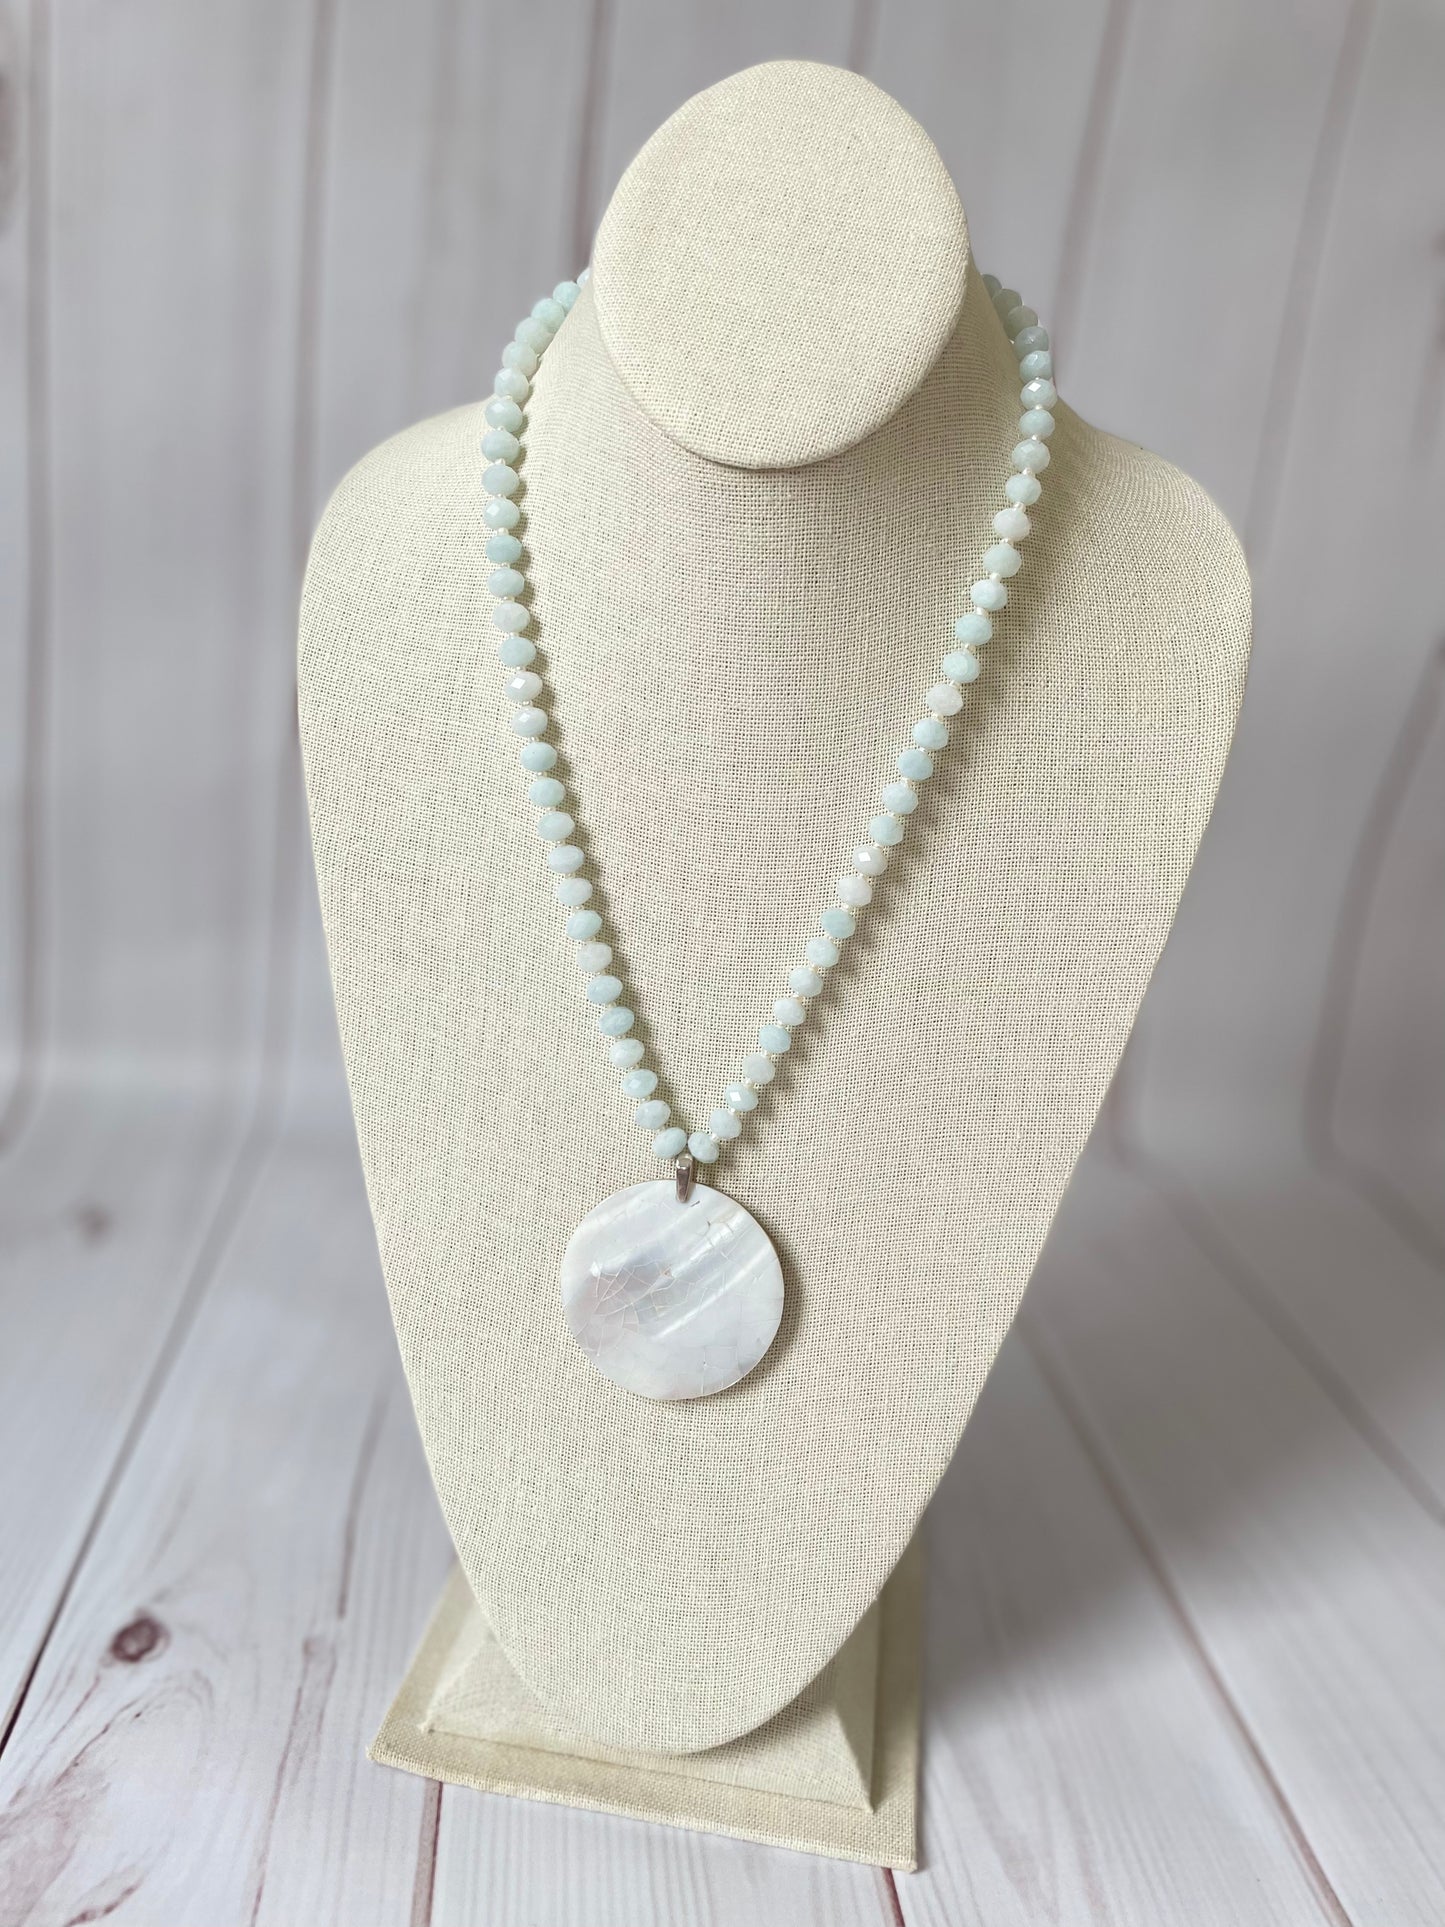 Aquamarine and Mother of Pearl Necklace